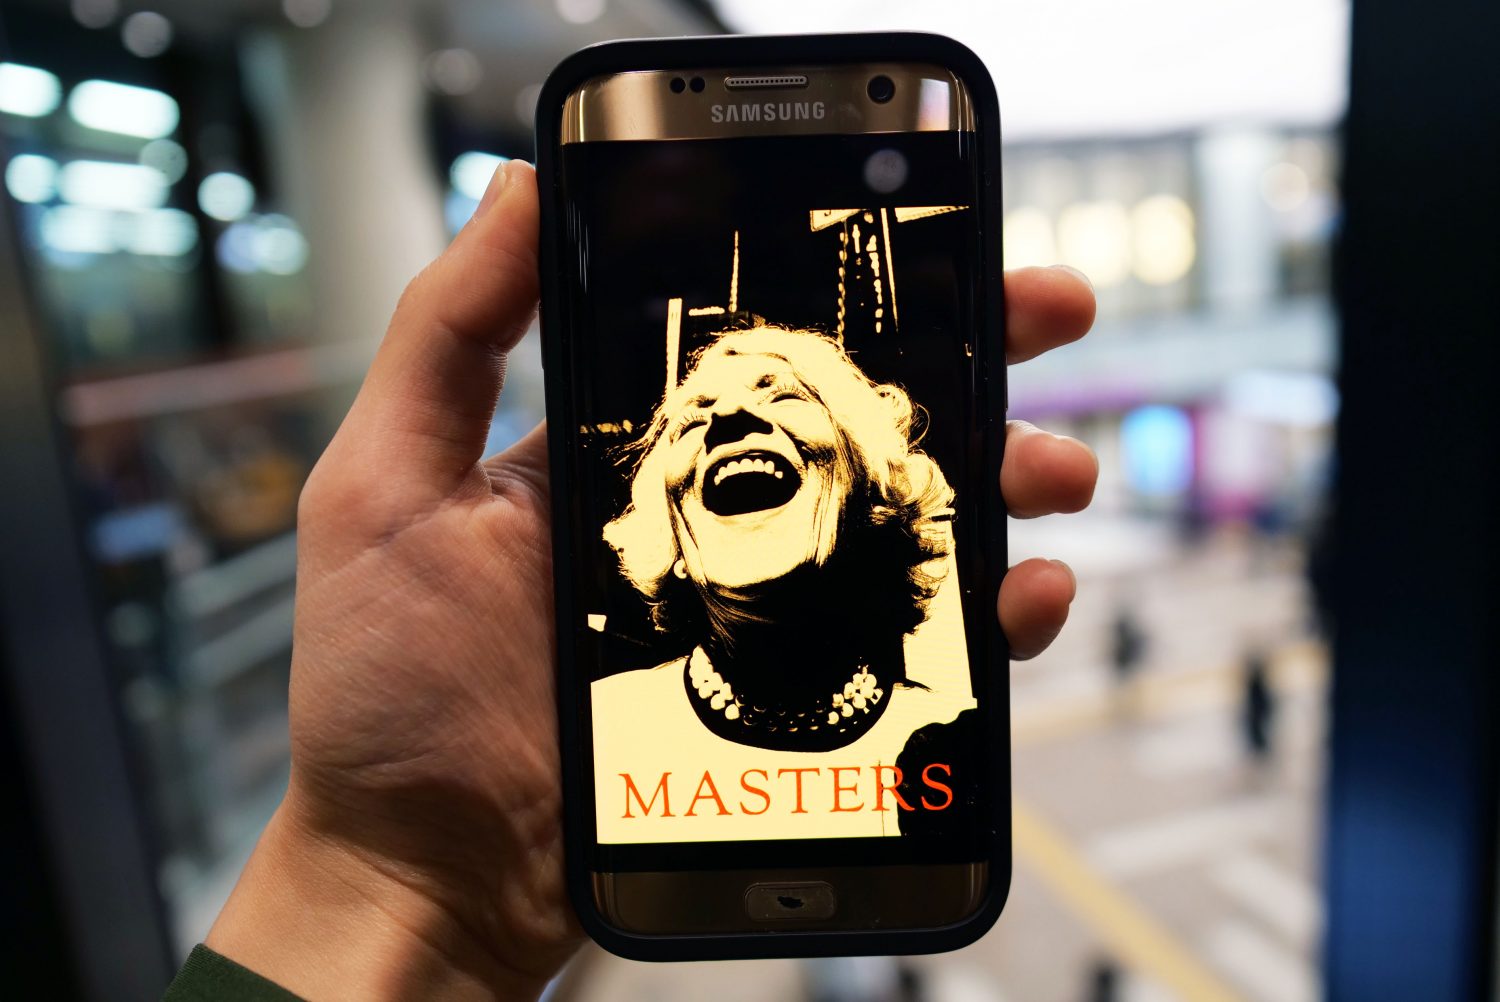 MASTERS Volume 1 Mobile Edition